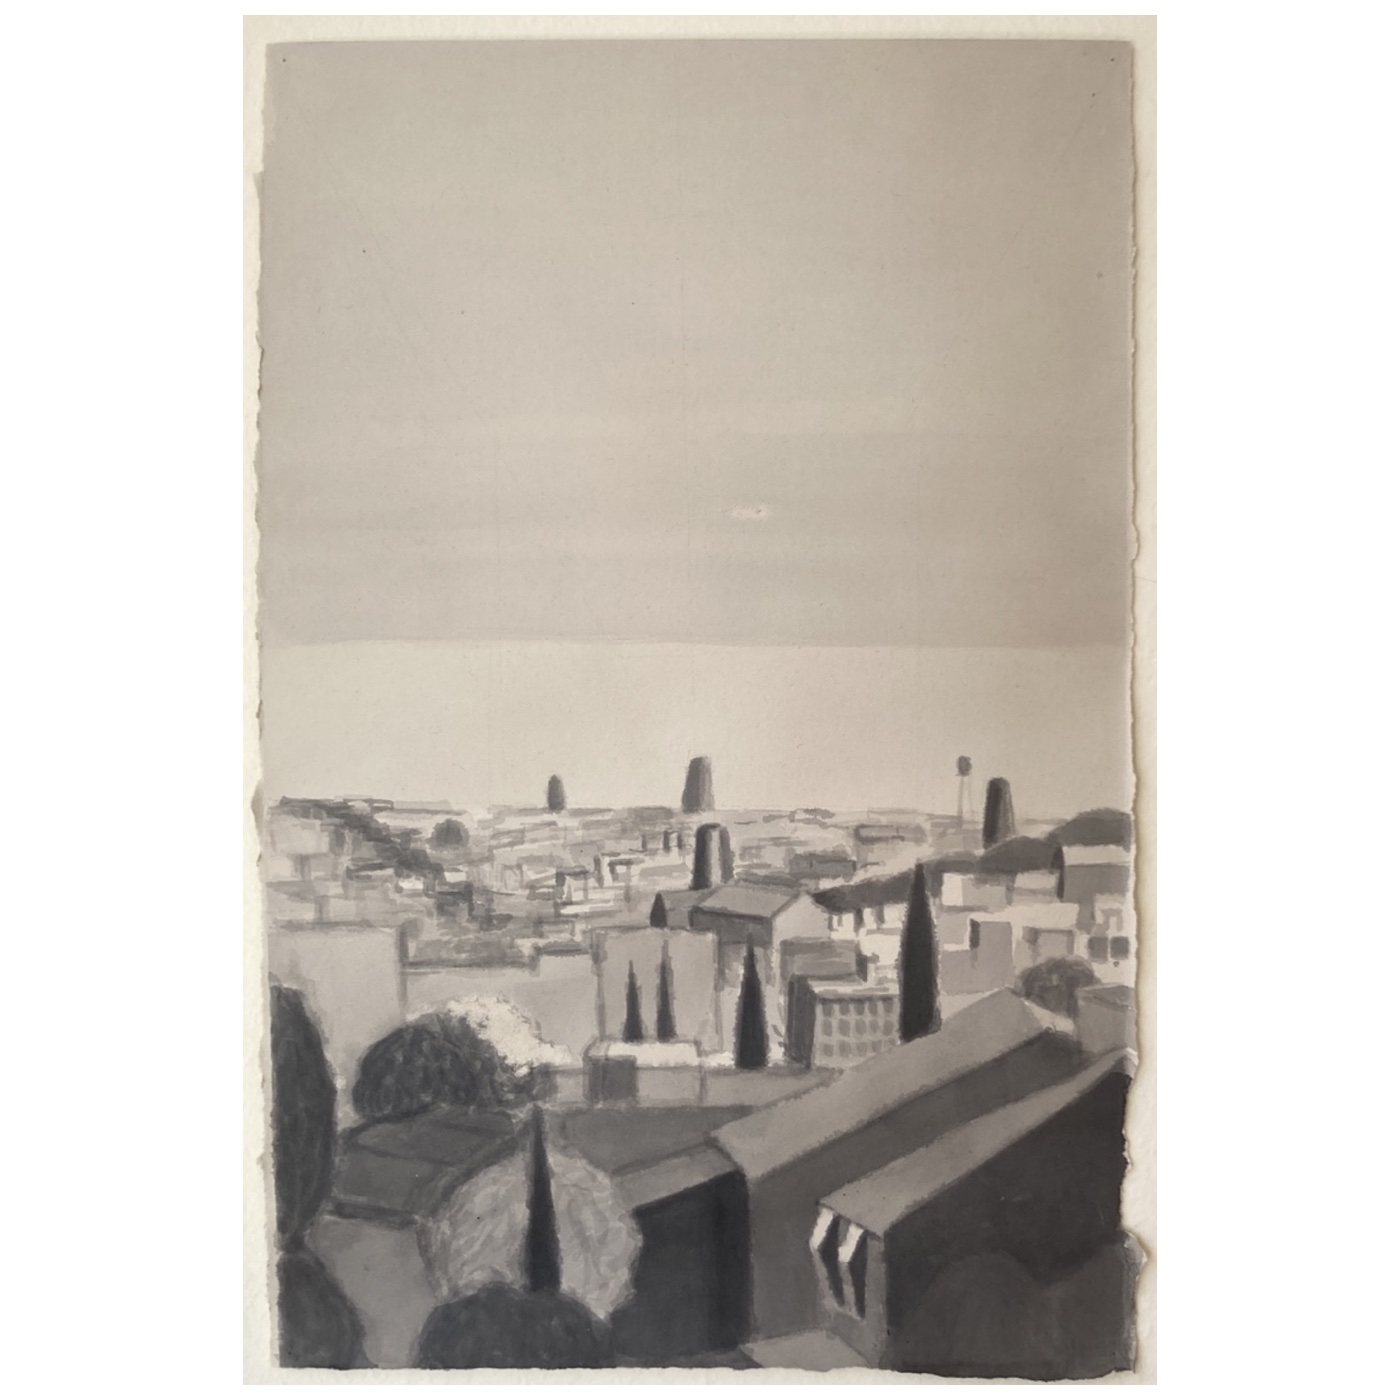 View of Barcelona from Vallcarca